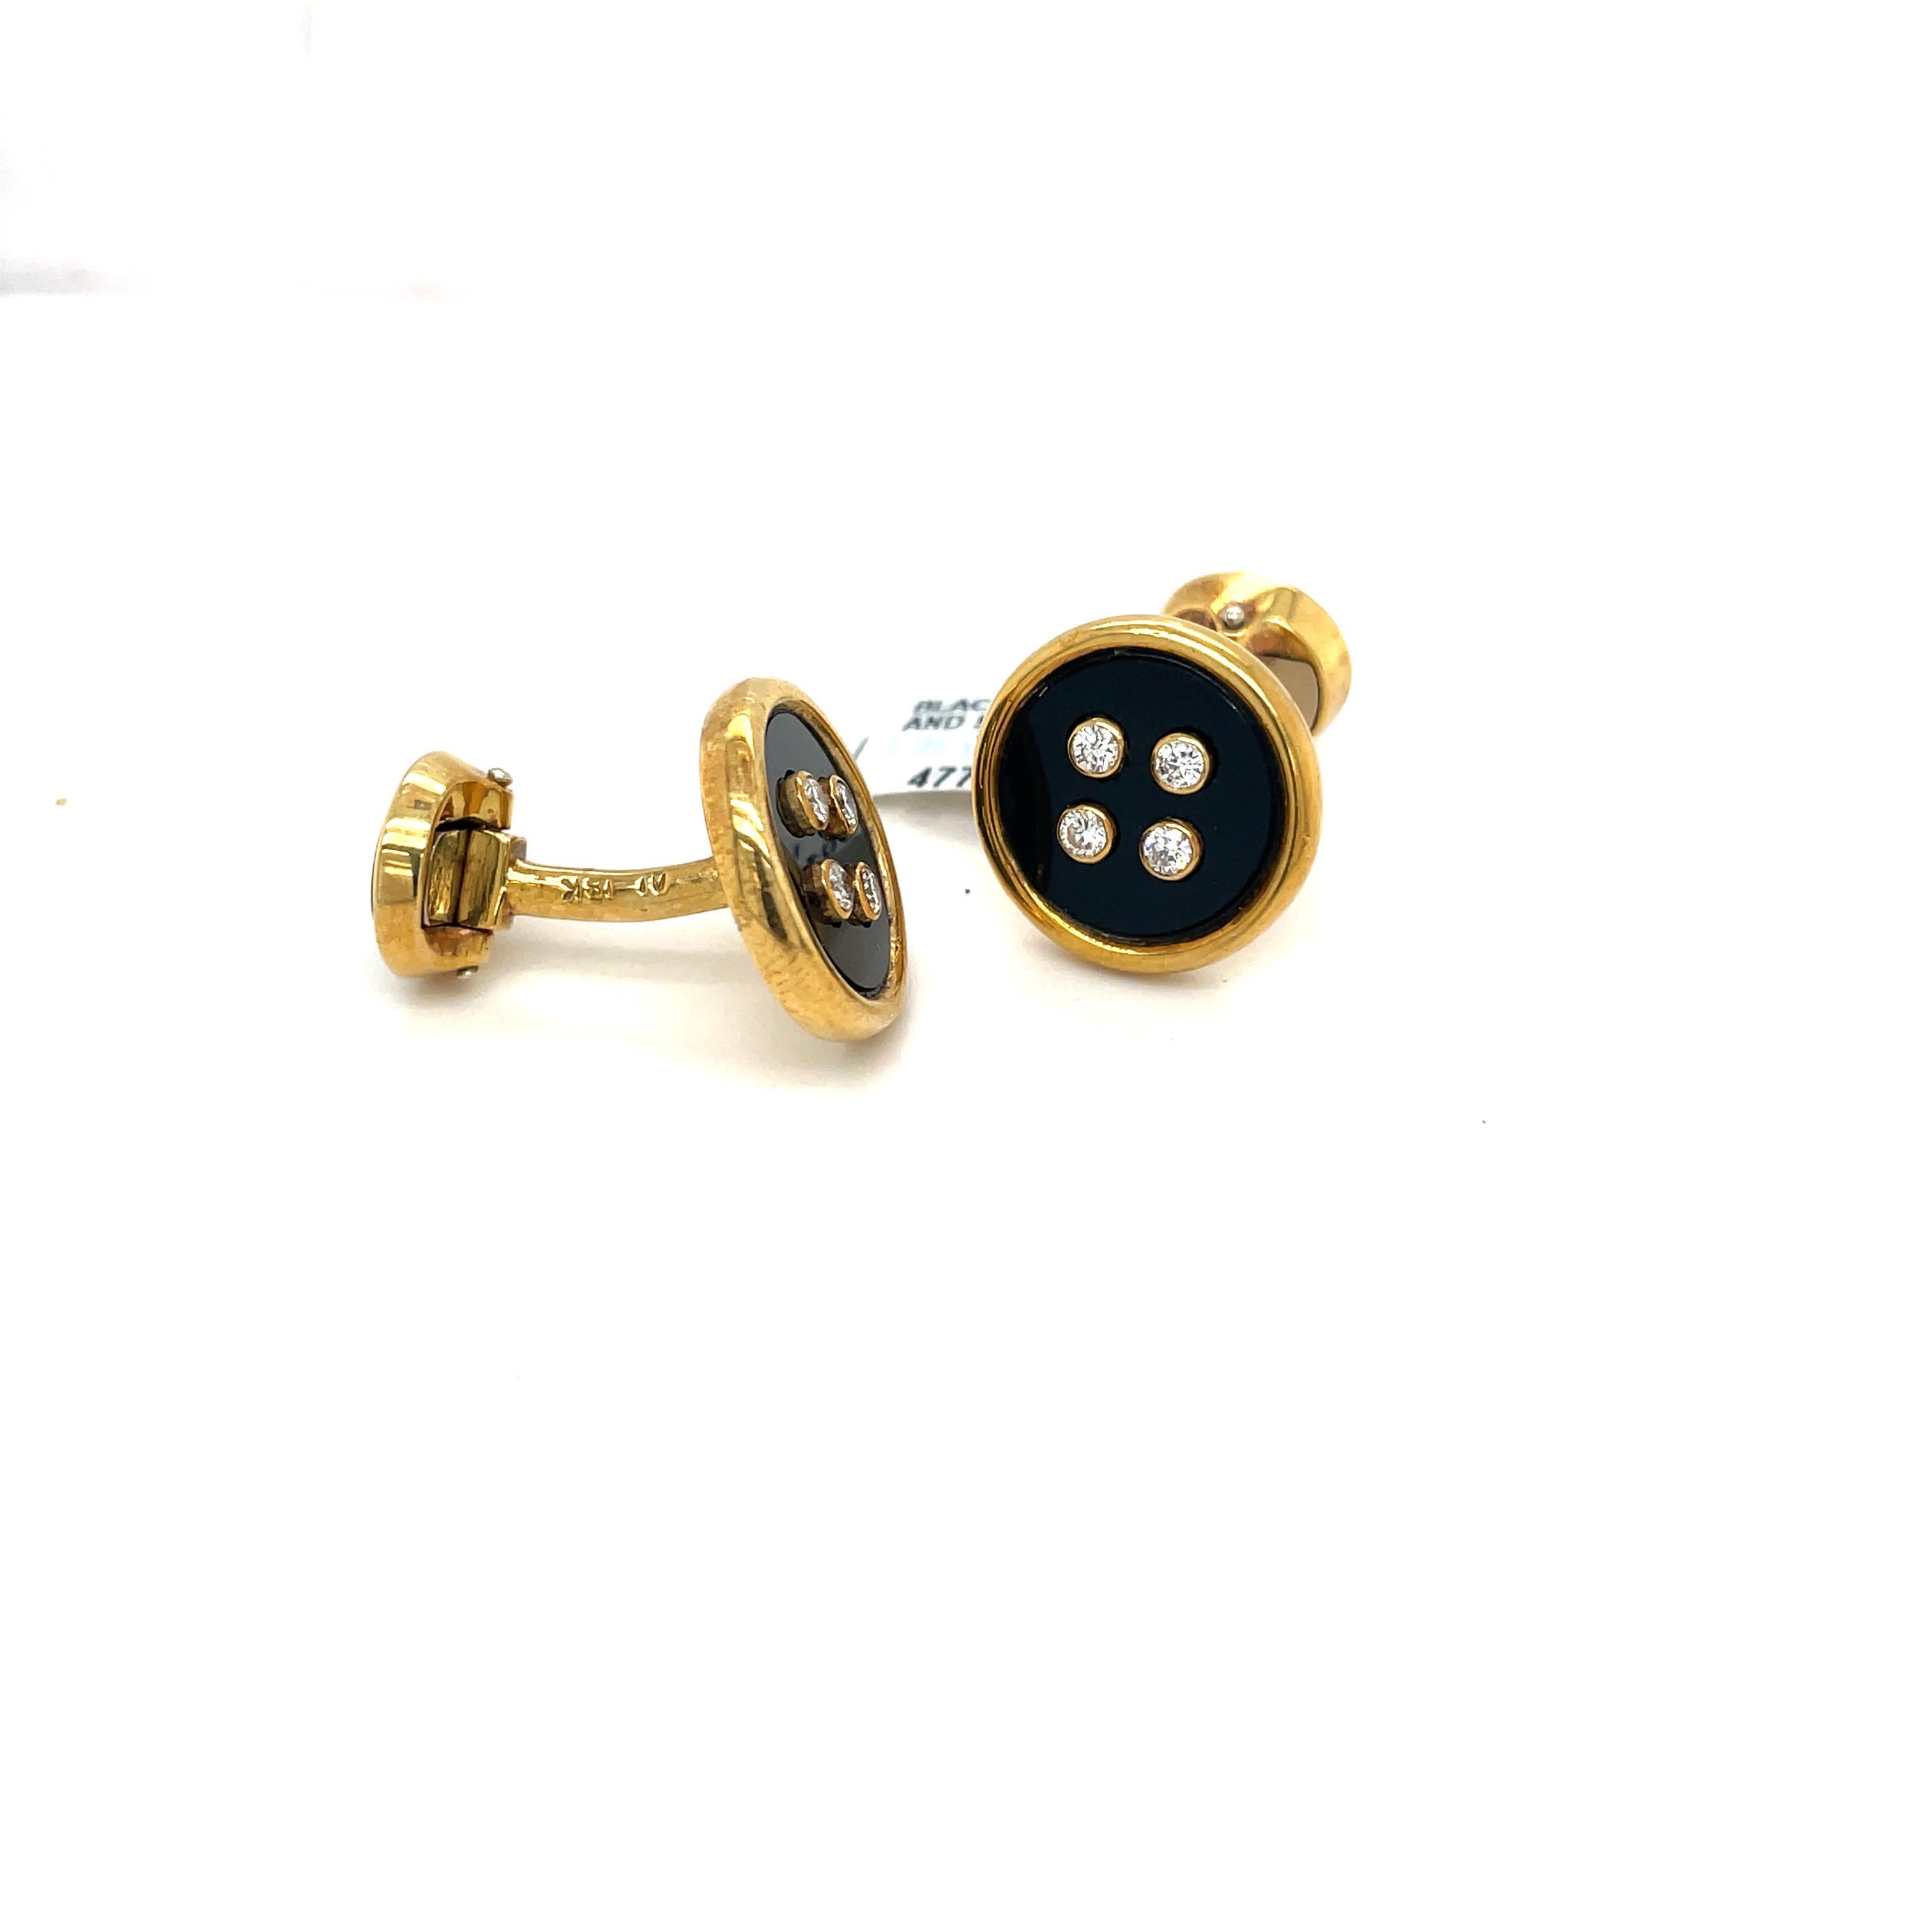 18 karat yellow gold  and black onyx round cuff links. The double sided cuff -links are set with 4 bezel set diamonds on each onyx section. The cuff-links are accompanied by 3 studs of the same.
Stamped  AL 18 K